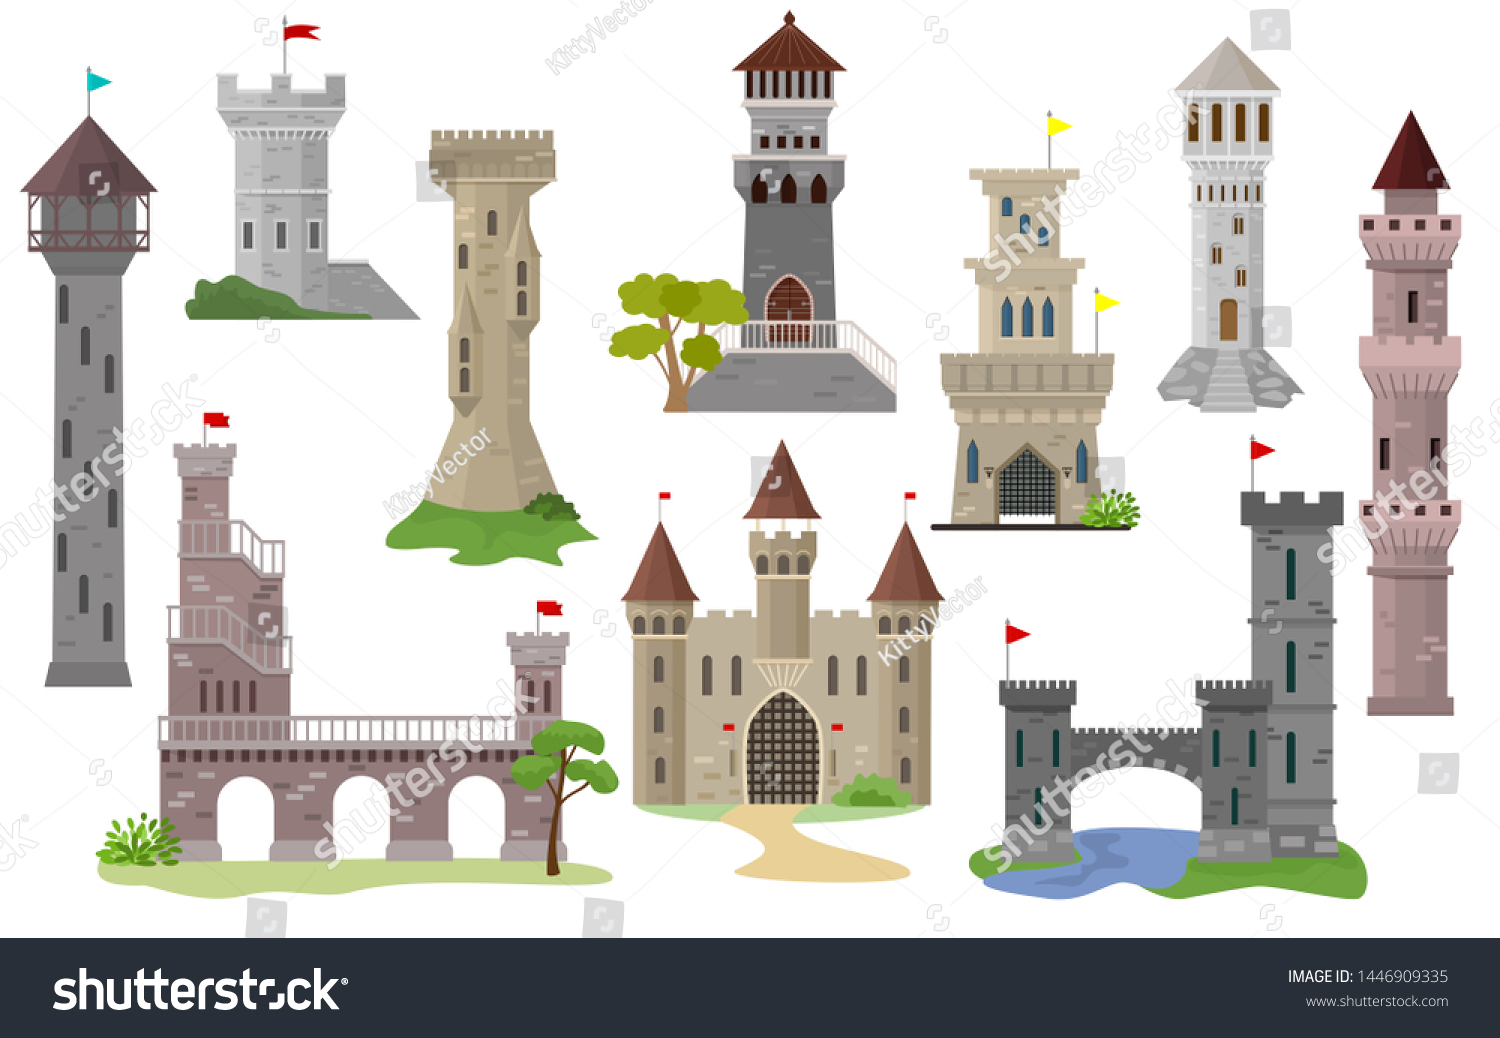 SVG of Cartoon castle vector fairytale medieval tower of fantasy palace building in kingdom fairyland illustration set of historical fairy-tale house isolated on white background svg